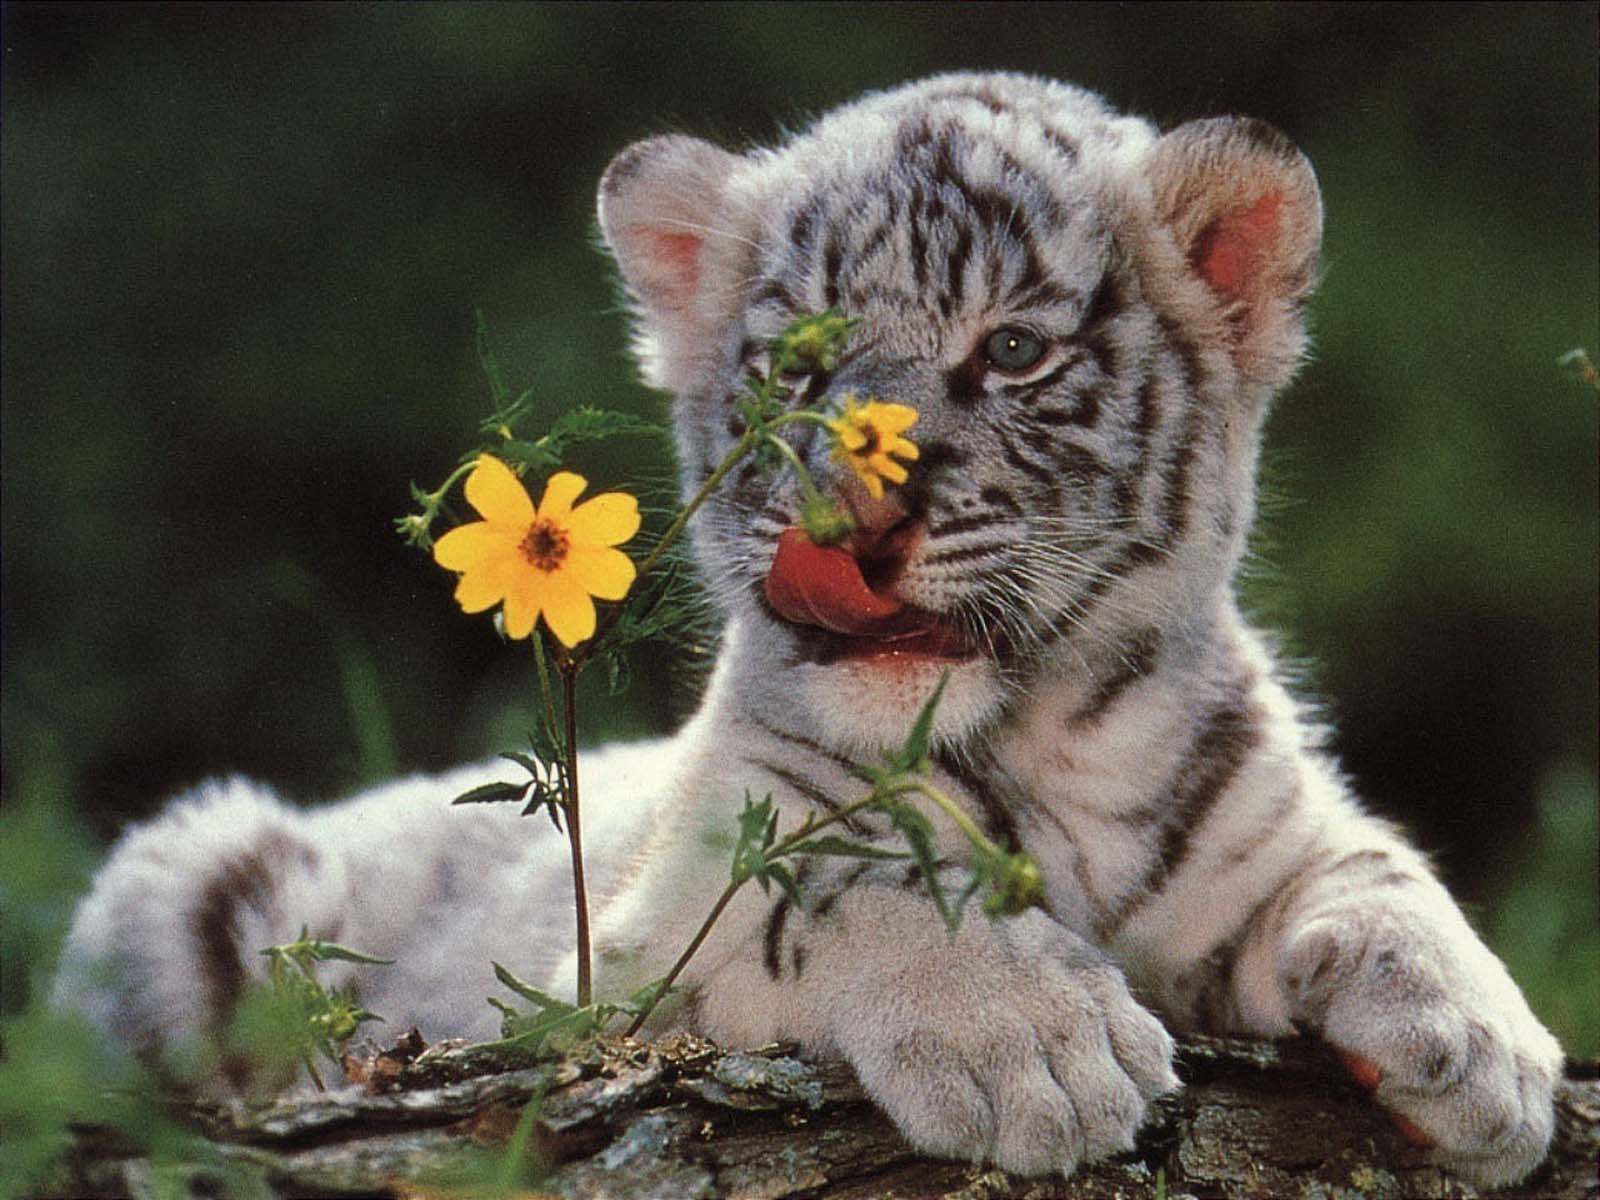 Baby Tiger Wallpaper, image collections of wallpaper